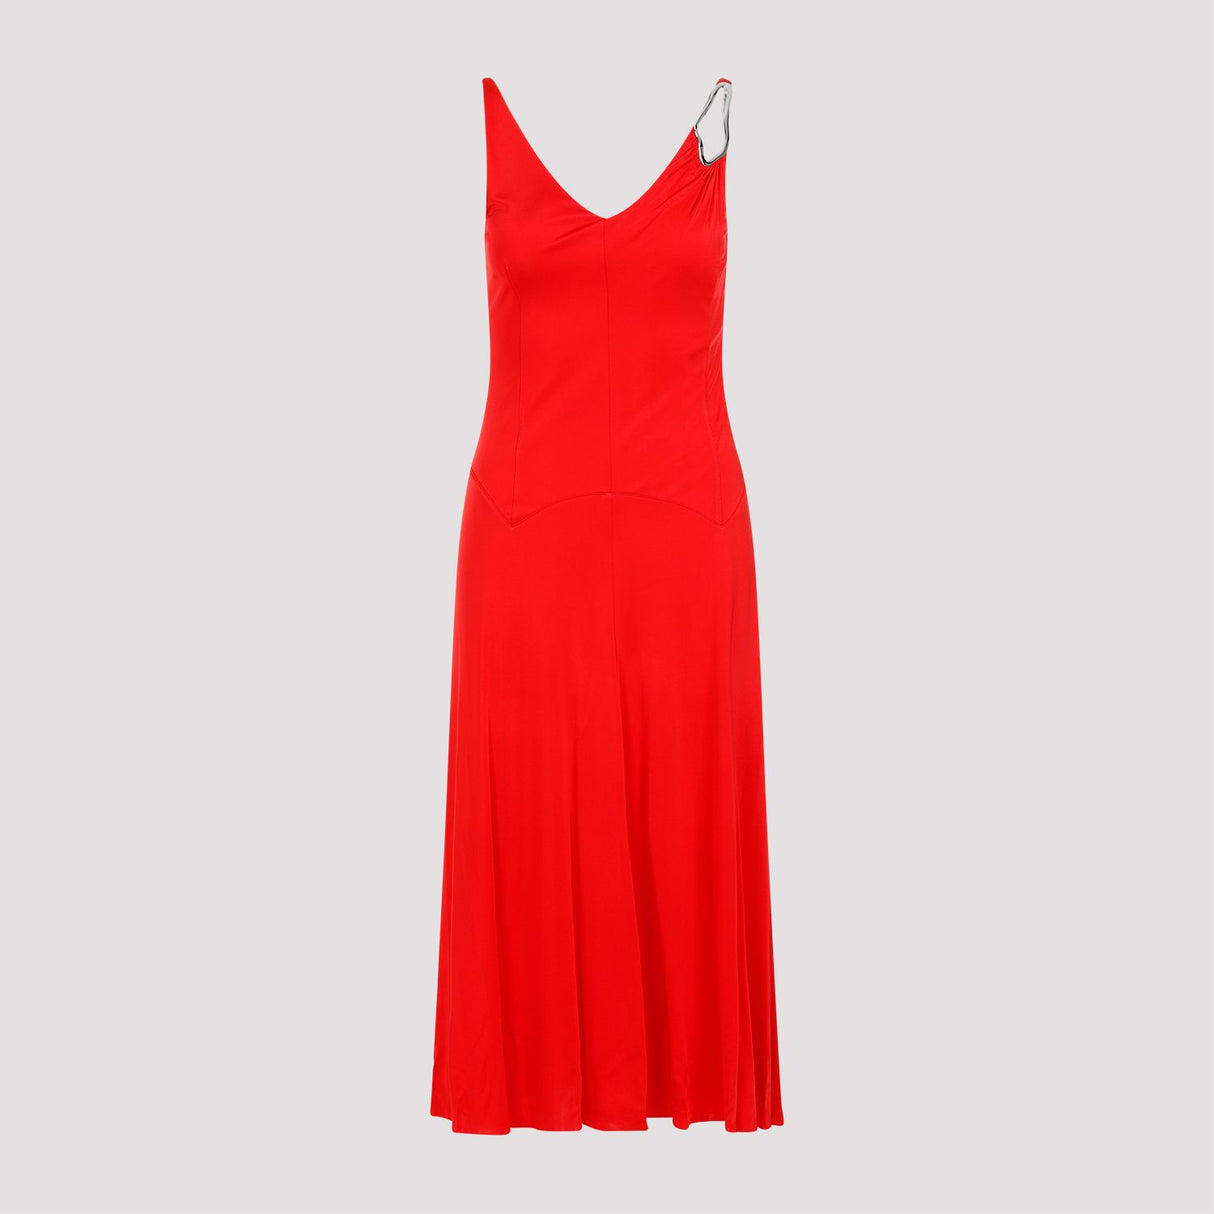 LANVIN Elegant A-Line Midi Dress in Bold Red for Women - SS24 Collection